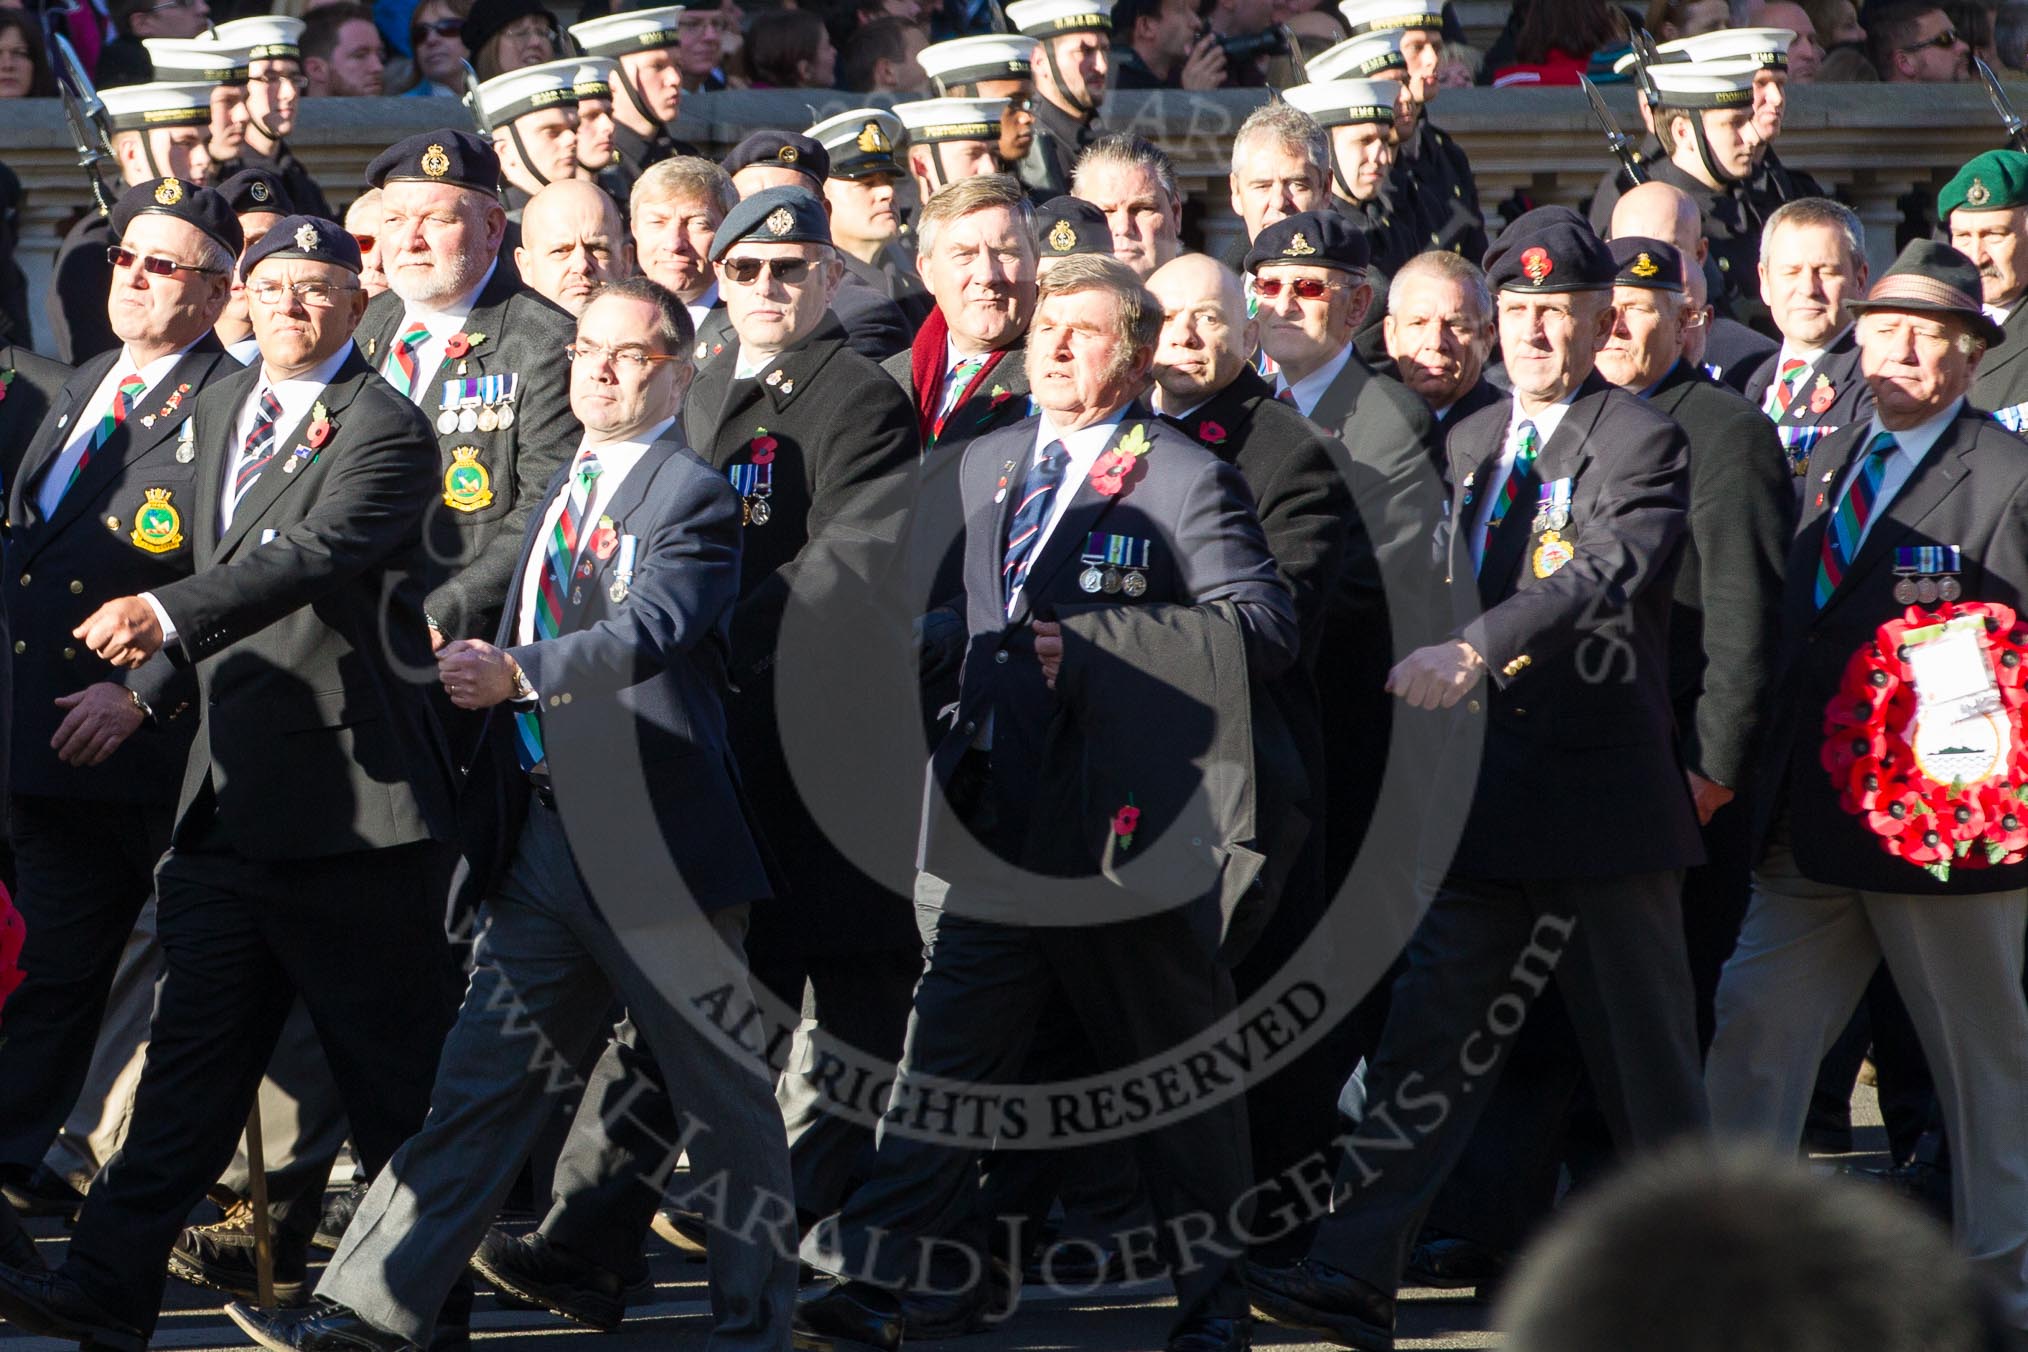 Remembrance Sunday 2012 Cenotaph March Past: Group D1 - South Atlantic Medal Association..
Whitehall, Cenotaph,
London SW1,

United Kingdom,
on 11 November 2012 at 12:04, image #1212